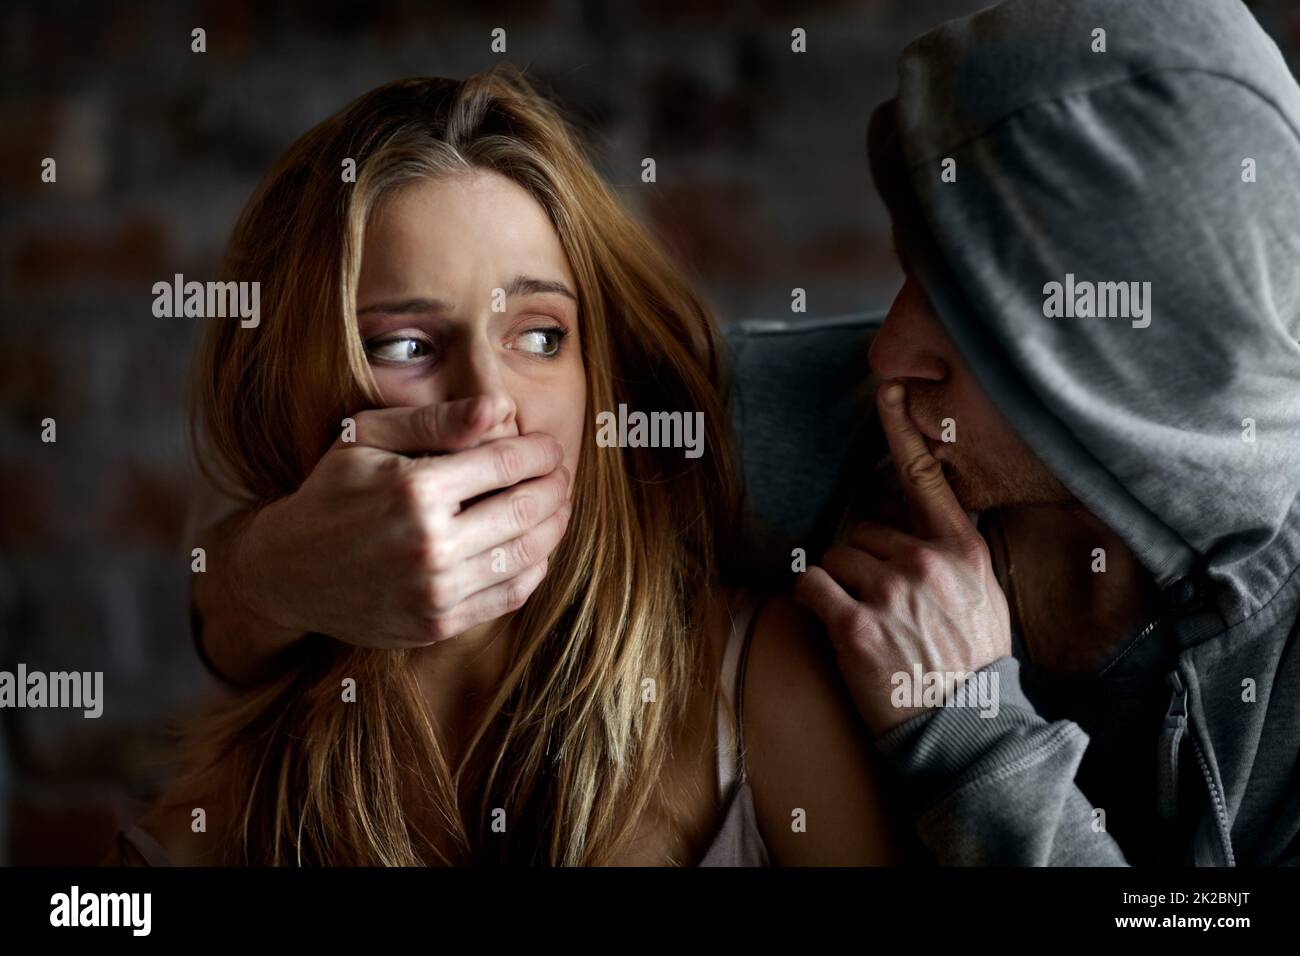 Held captive. Abused young woman being silenced by her abuser. Stock Photo